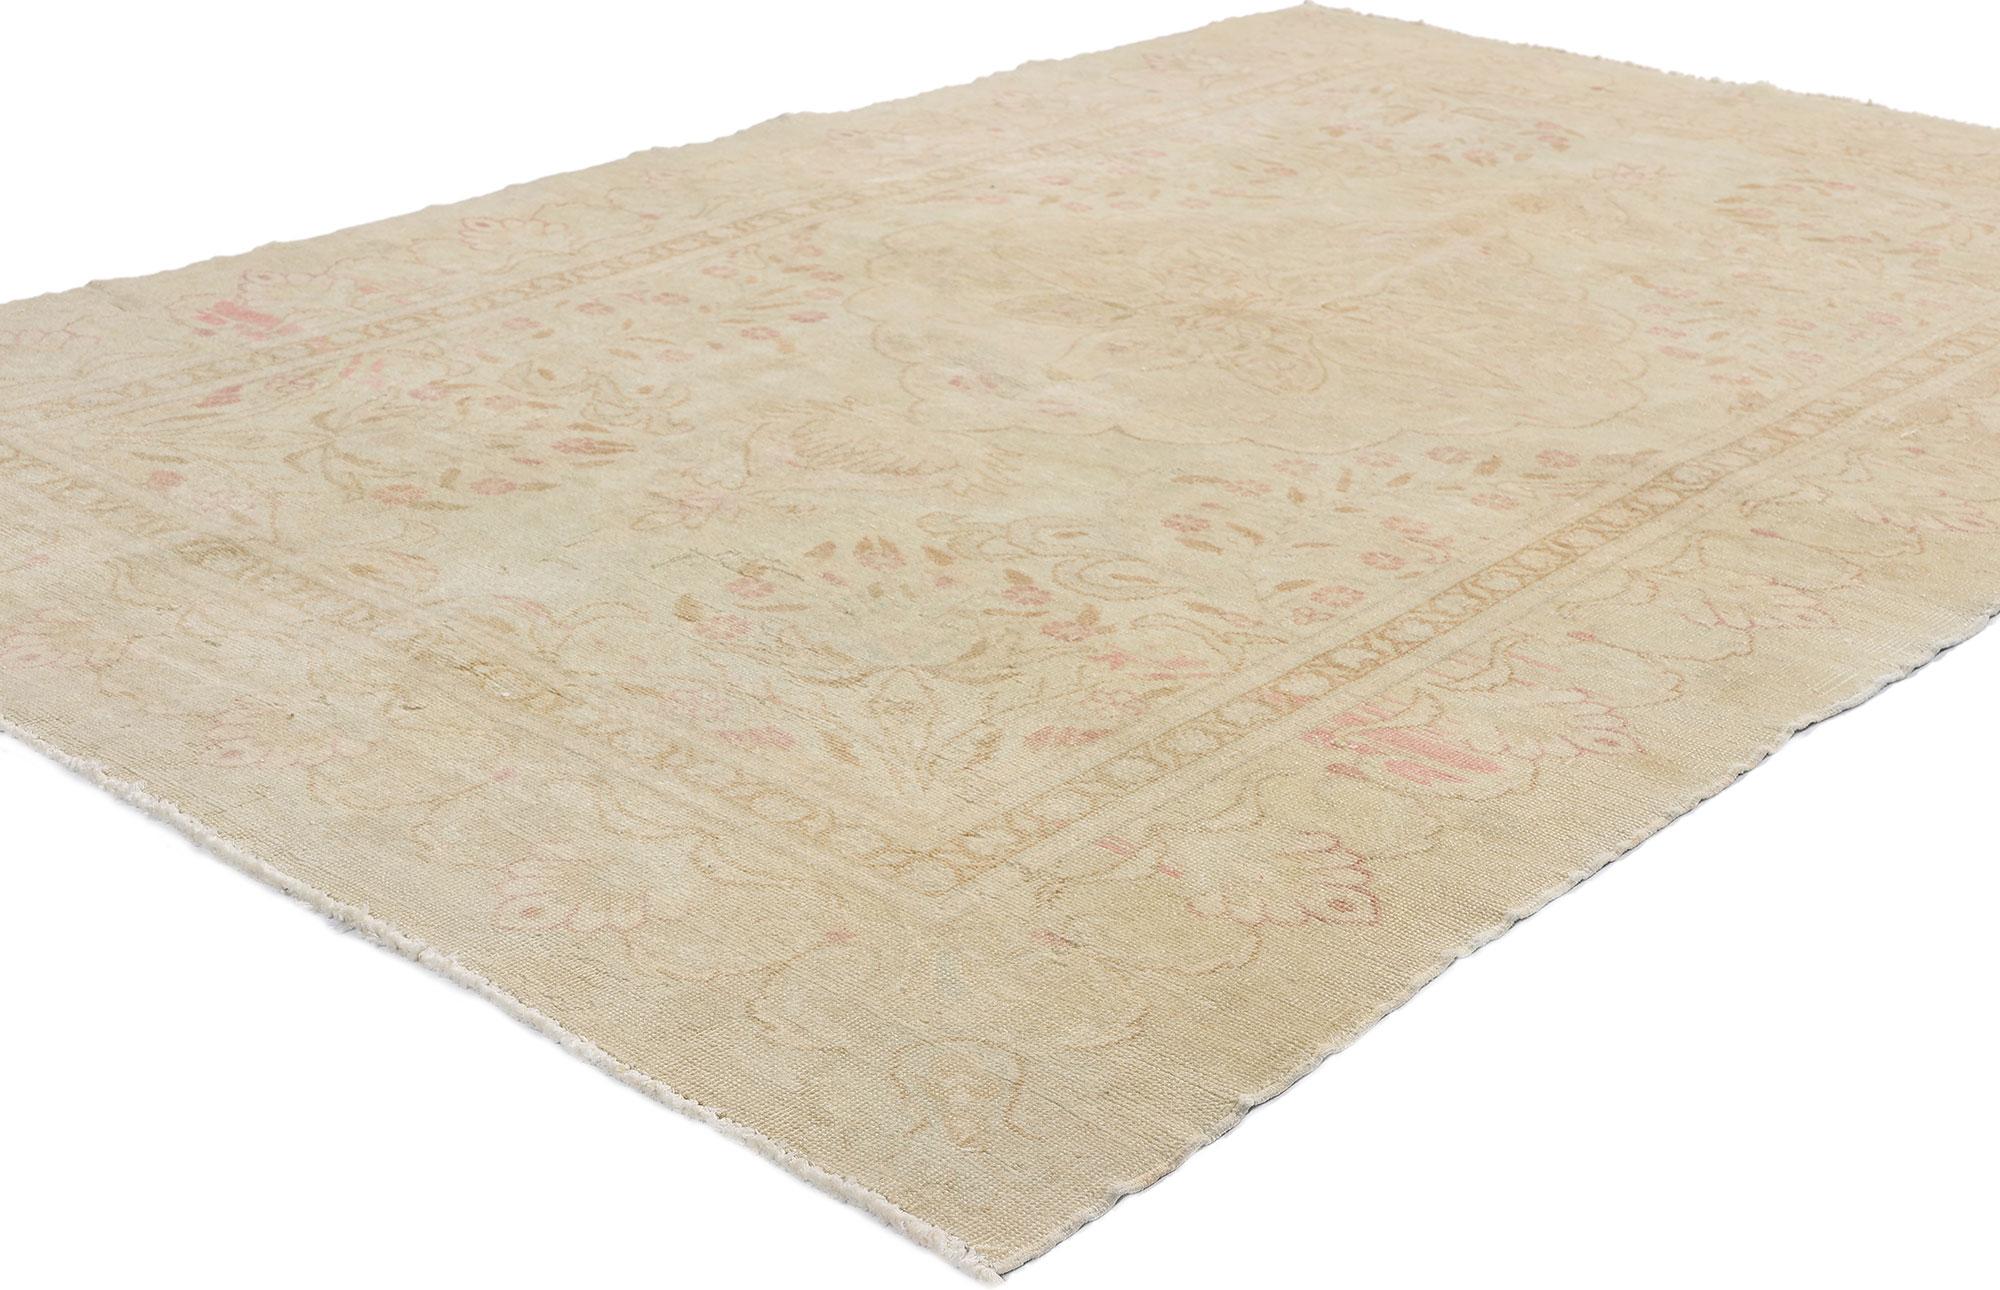 53937 Vintage Turkish Sivas Rug, 03'11 x 06'00. Hailing from Sivas in central Anatolia, Turkey, antique-wash Turkish Sivas rugs are celebrated for their vintage allure achieved through a unique treatment process. Evoking the essence of relaxed